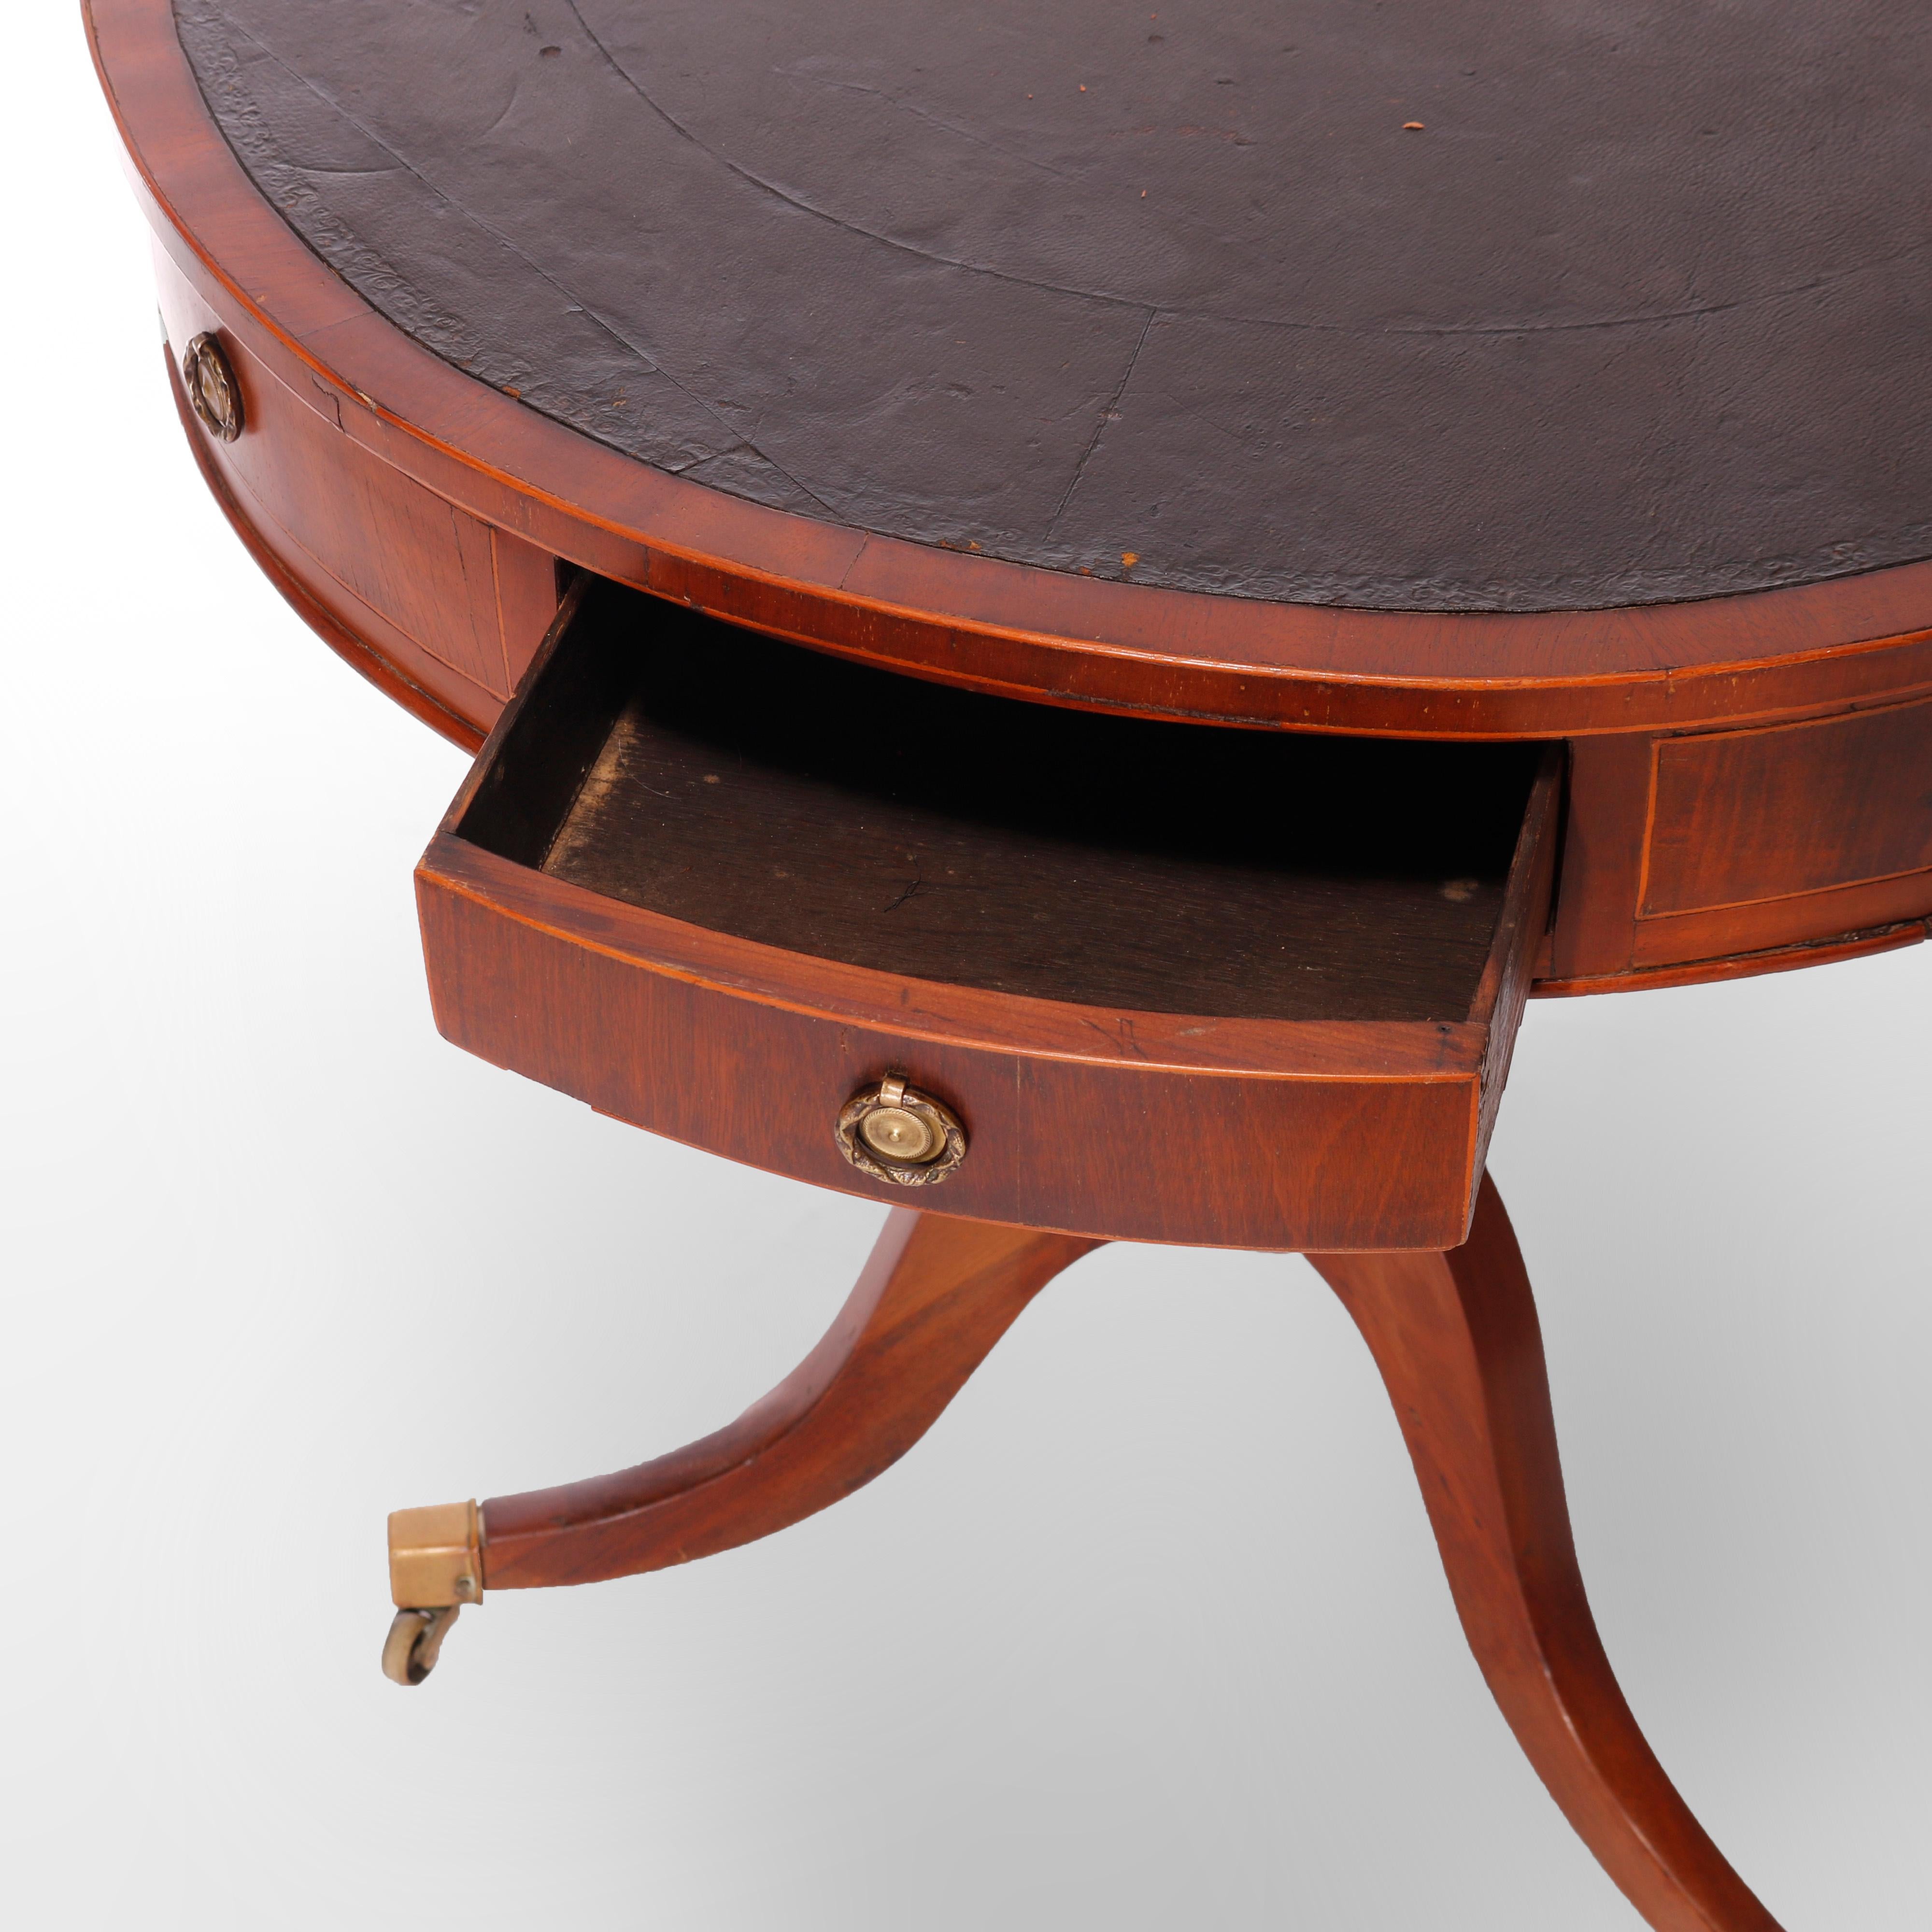 ***Ask About Reduced In-House Shipping Rates - Reliable Service & Fully Insured***
An antique English George III drum game table offers mahogany construction with leather top, single drawer, turned column and raised on cabriole legs,